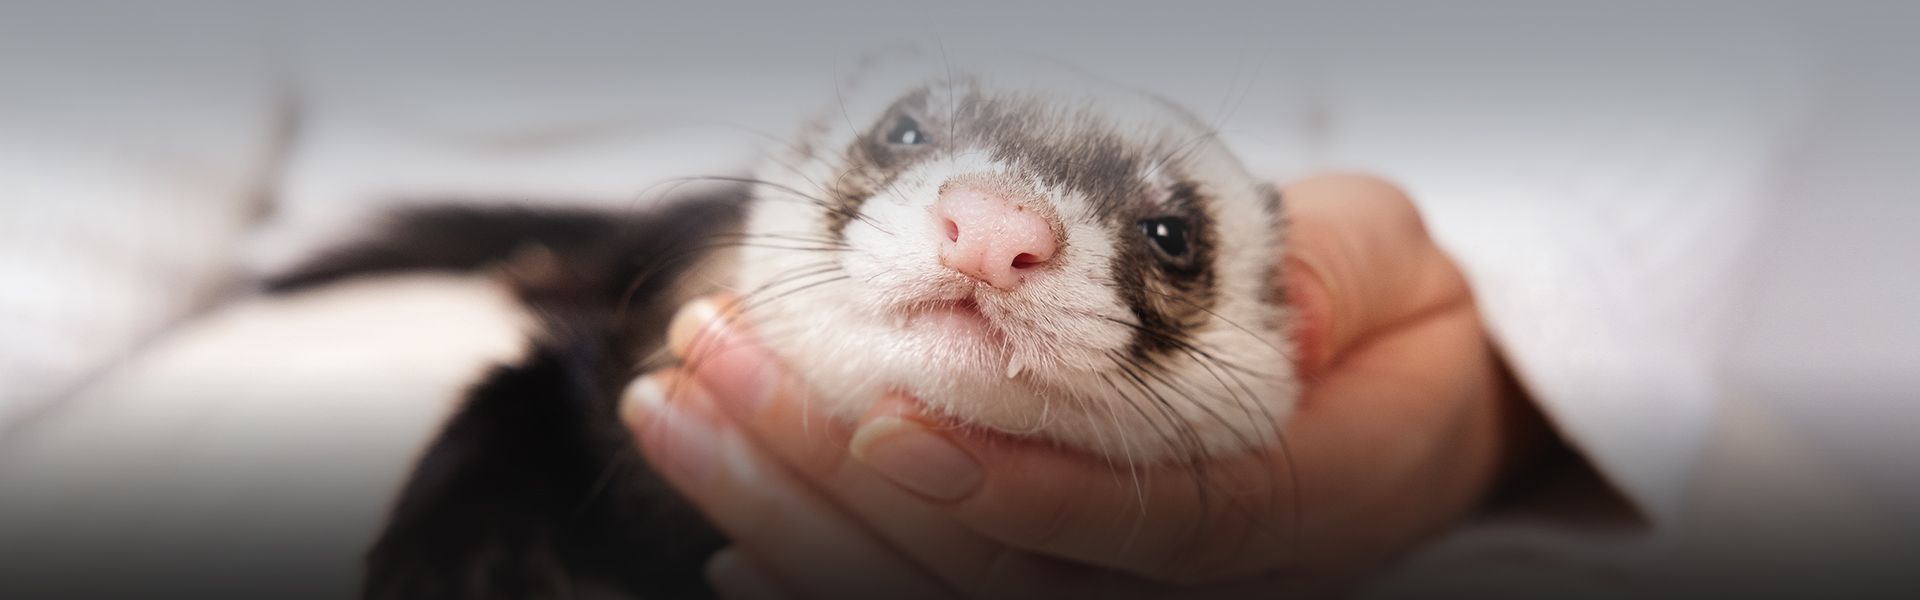 adorable domestic ferret in the girl's hand woman